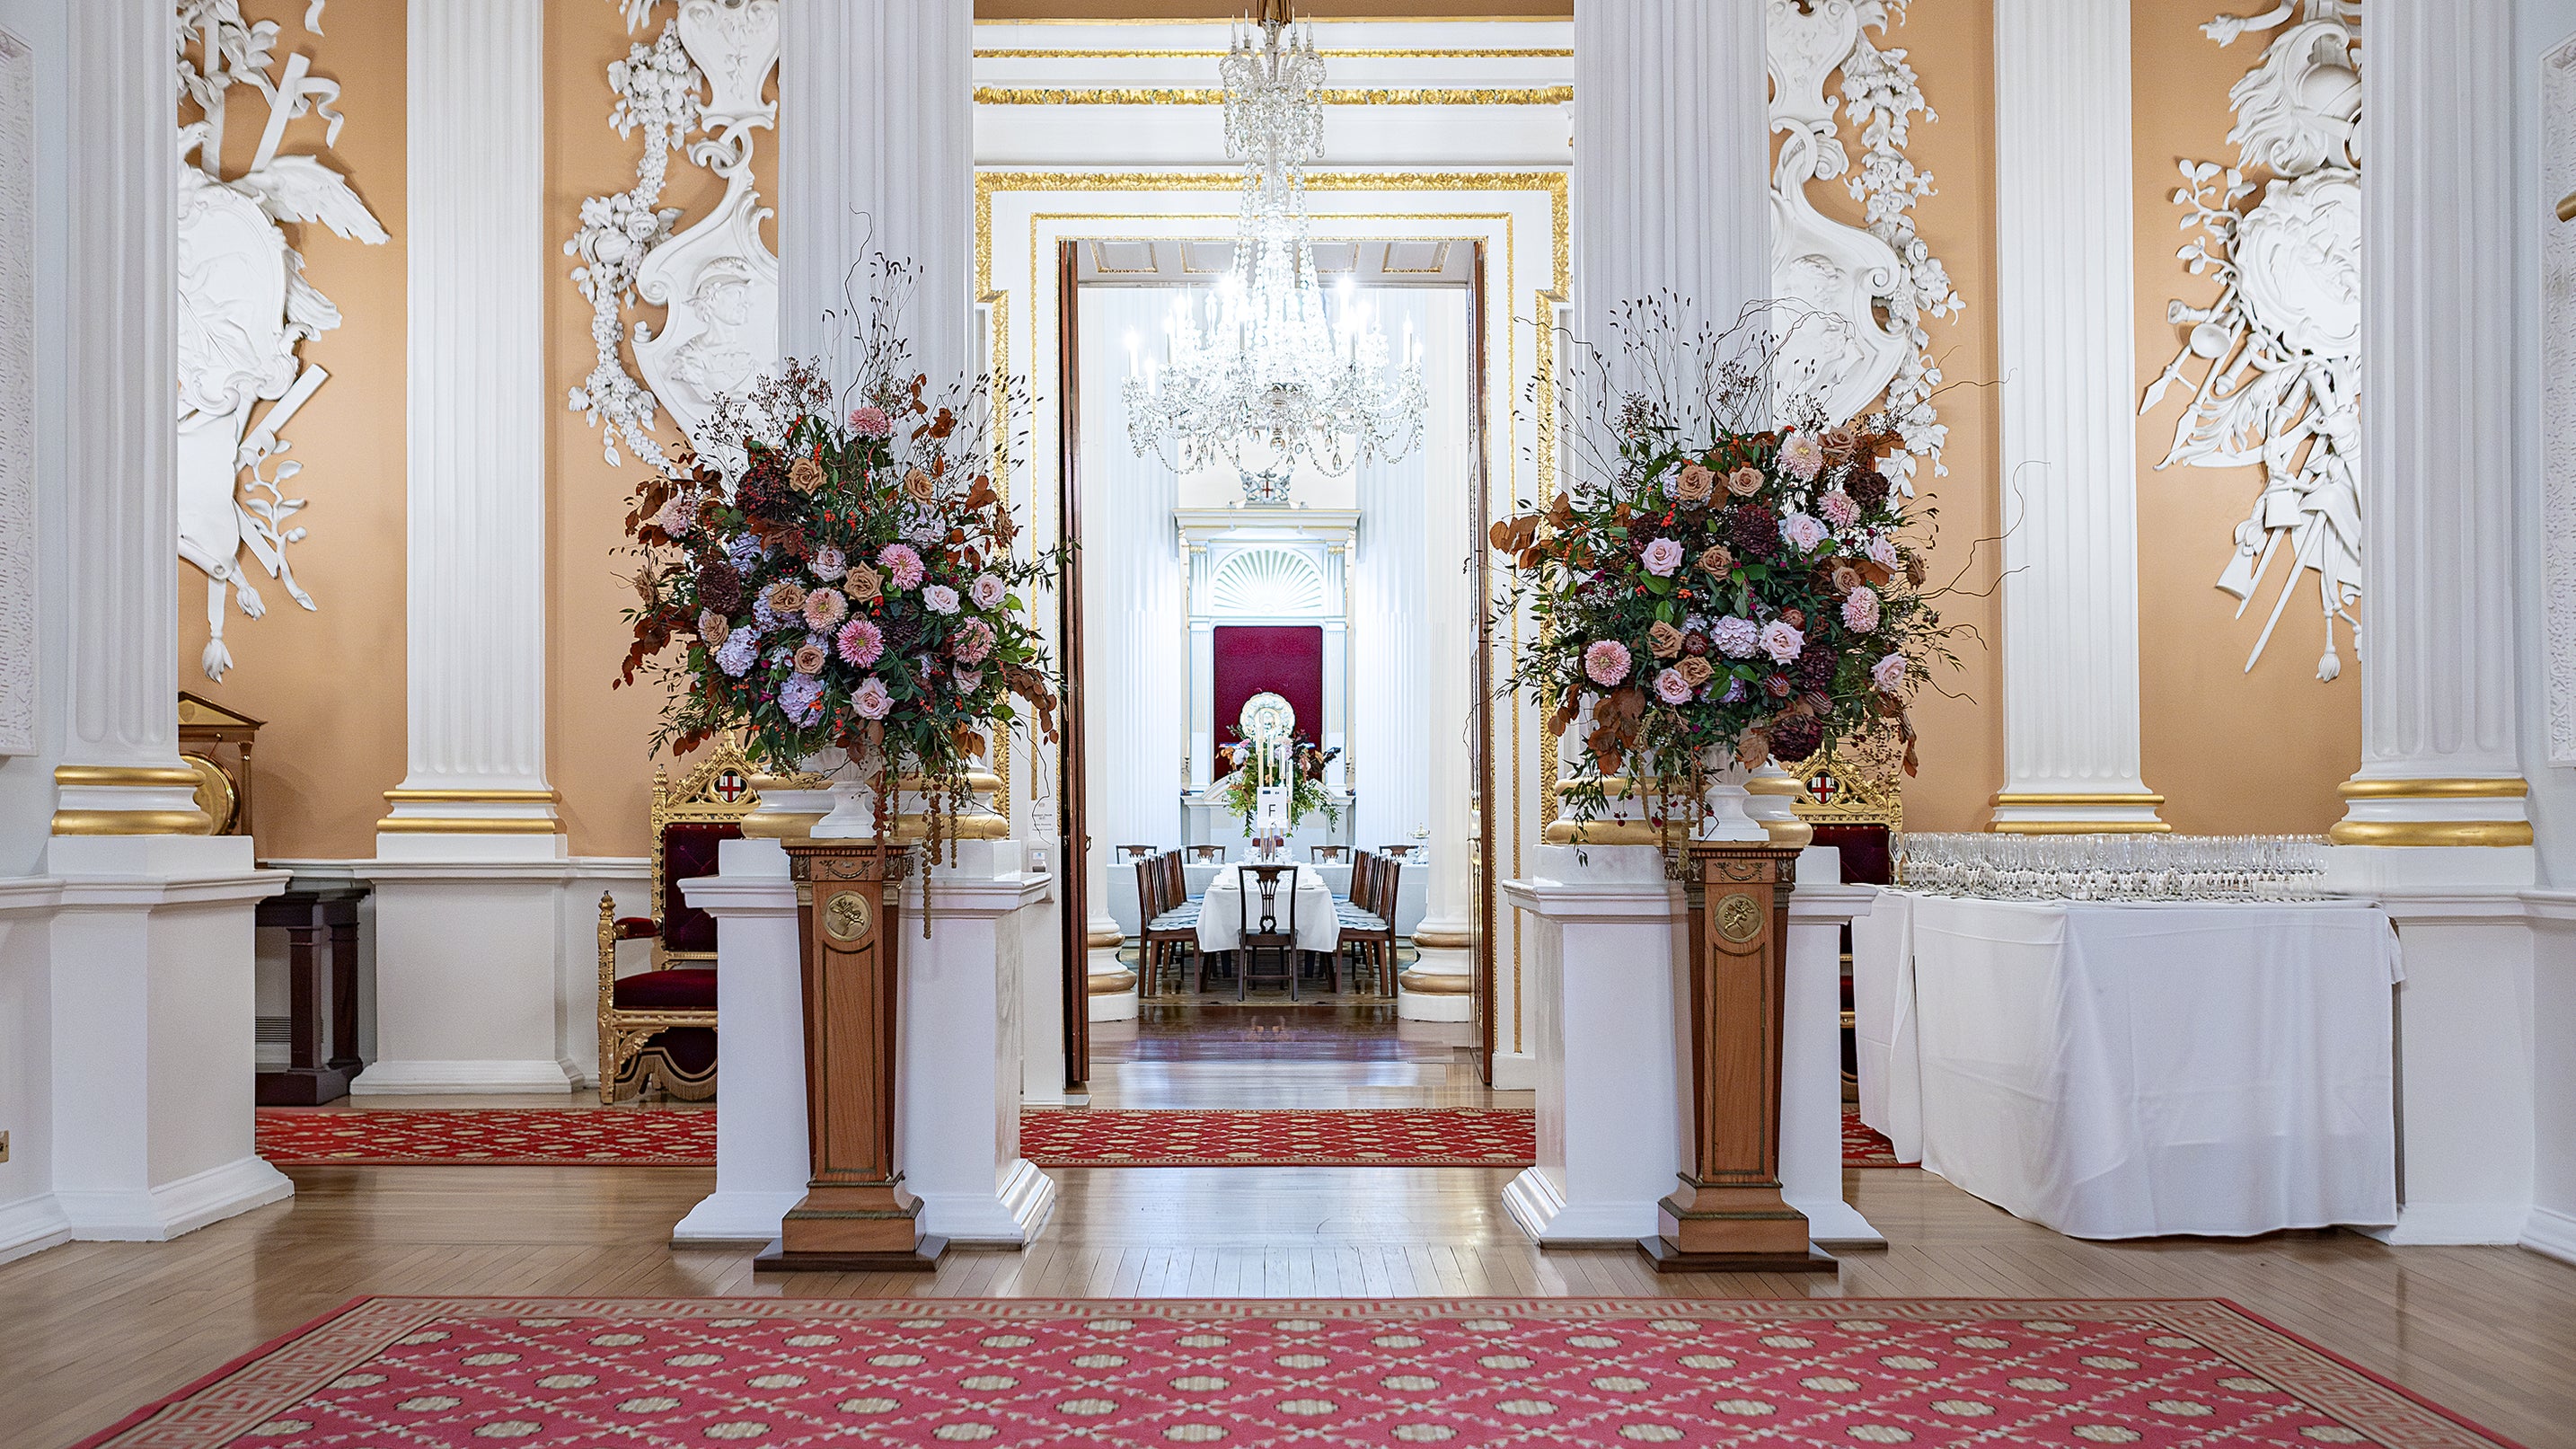 Exquisite bespoke floral arrangements on plinths to welcome guests at the entrance of the event.